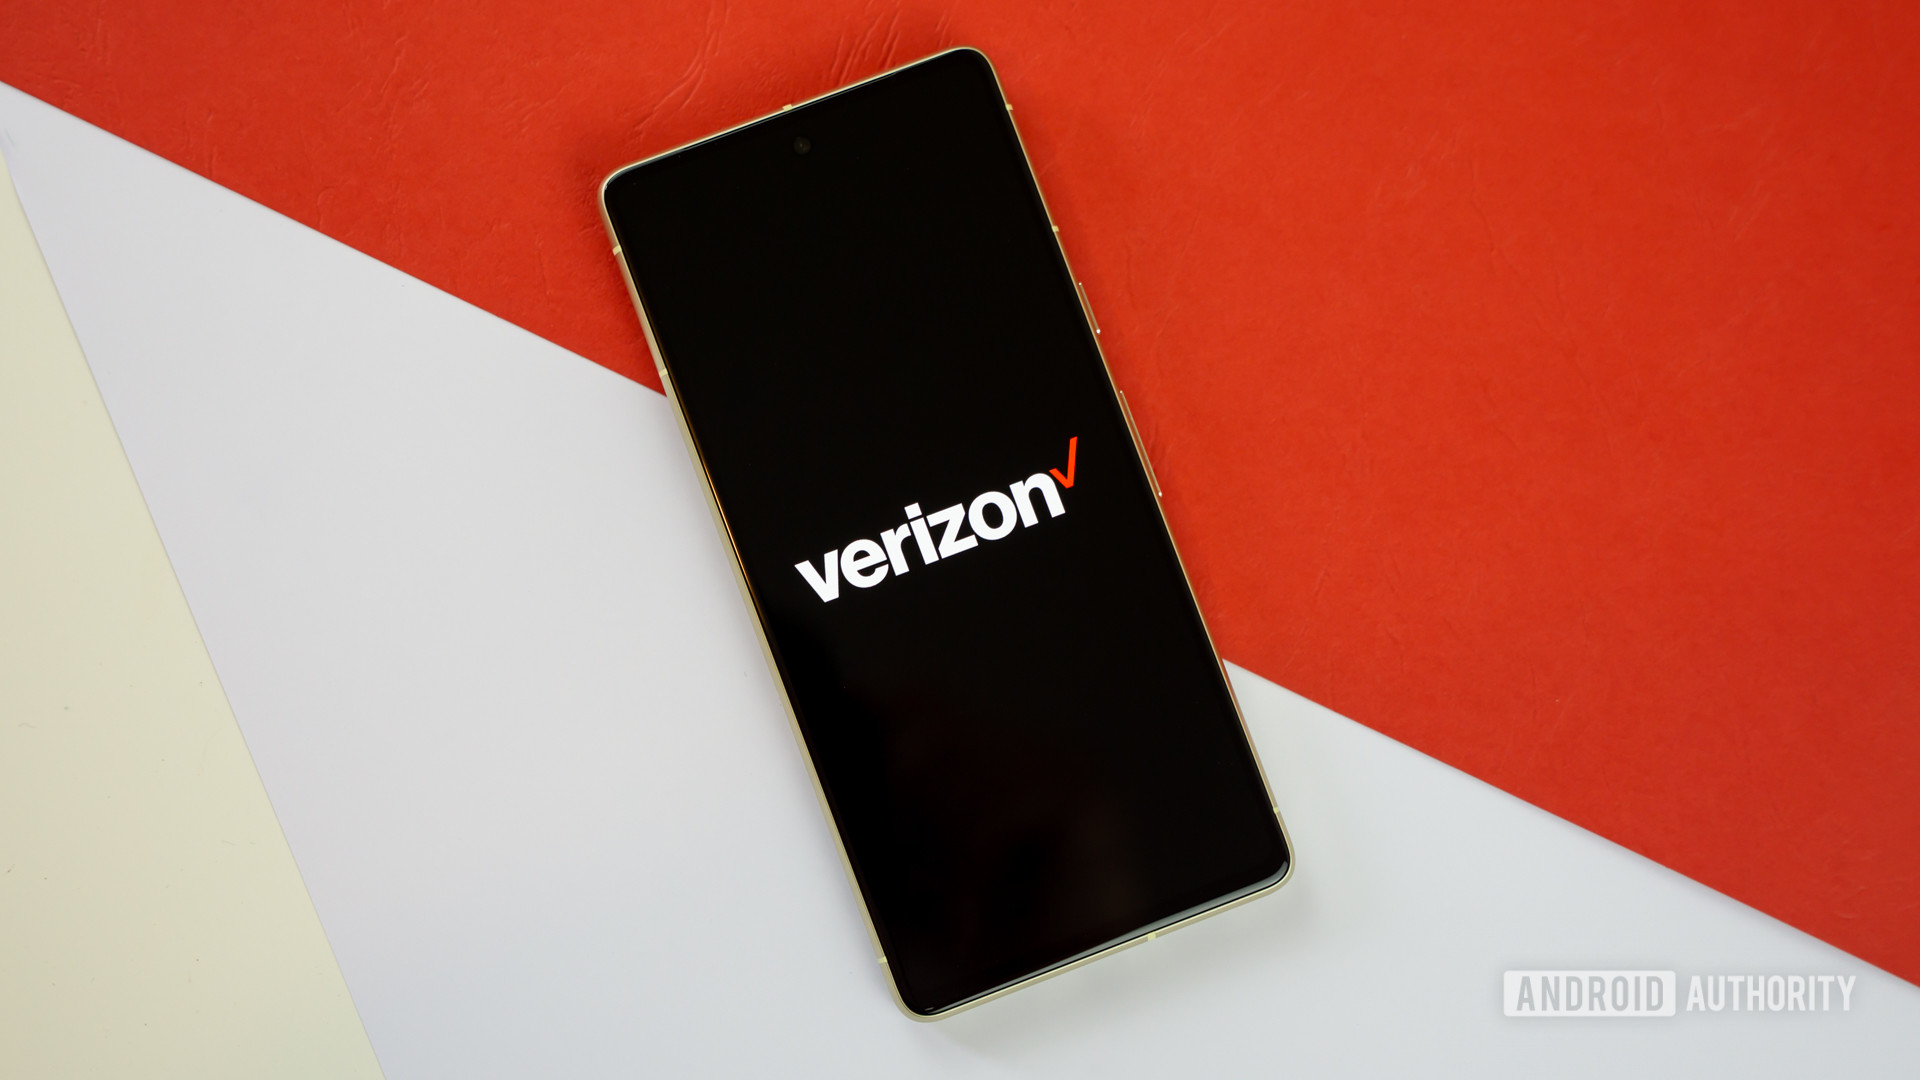 Verizon logo on smartphone with a colored background Stock photo 11